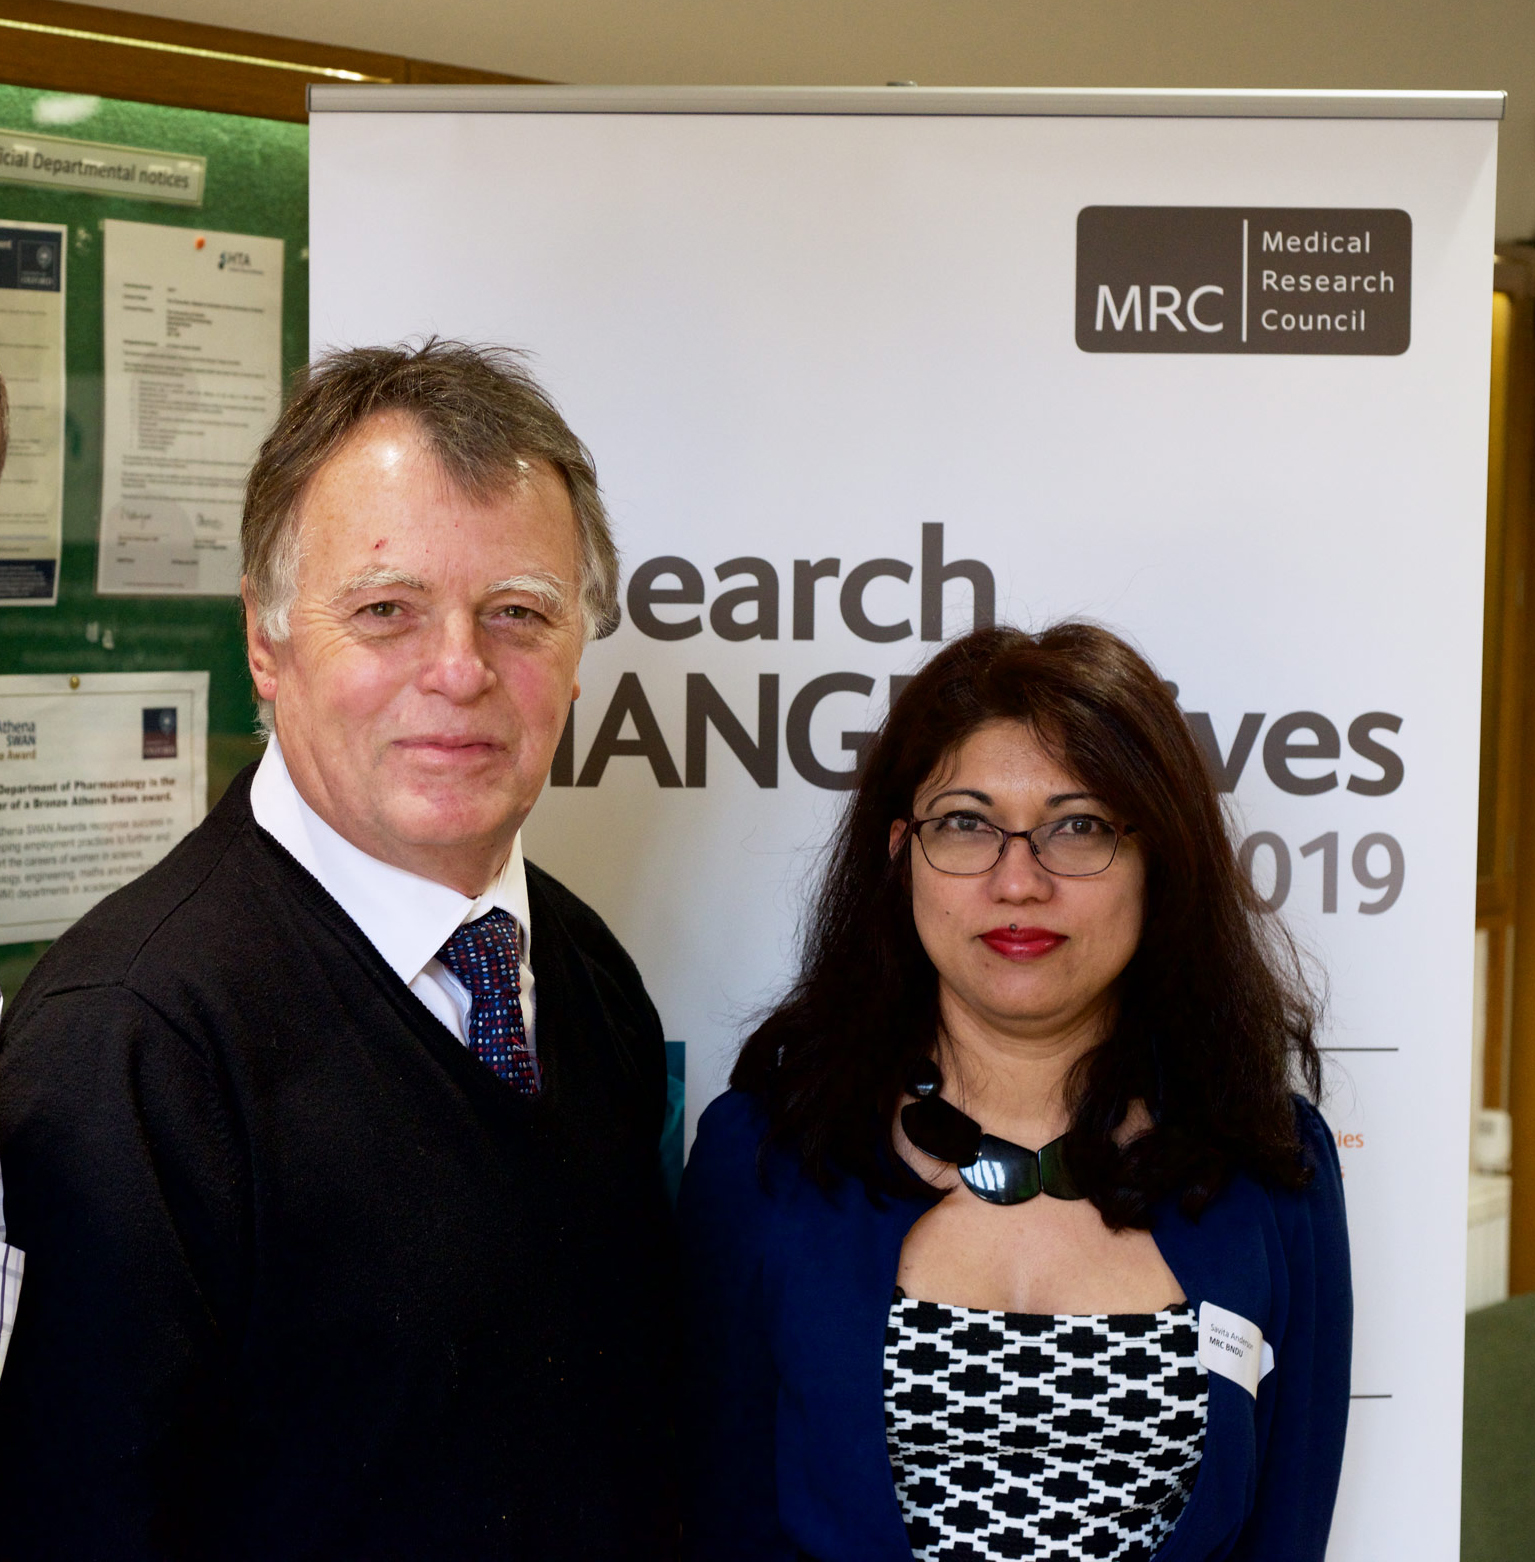 The MRC Unit is visited by Rt. Hon. Andrew Smith MP, here with Savita Anderson, one of the organisers of the Schools Open Day.